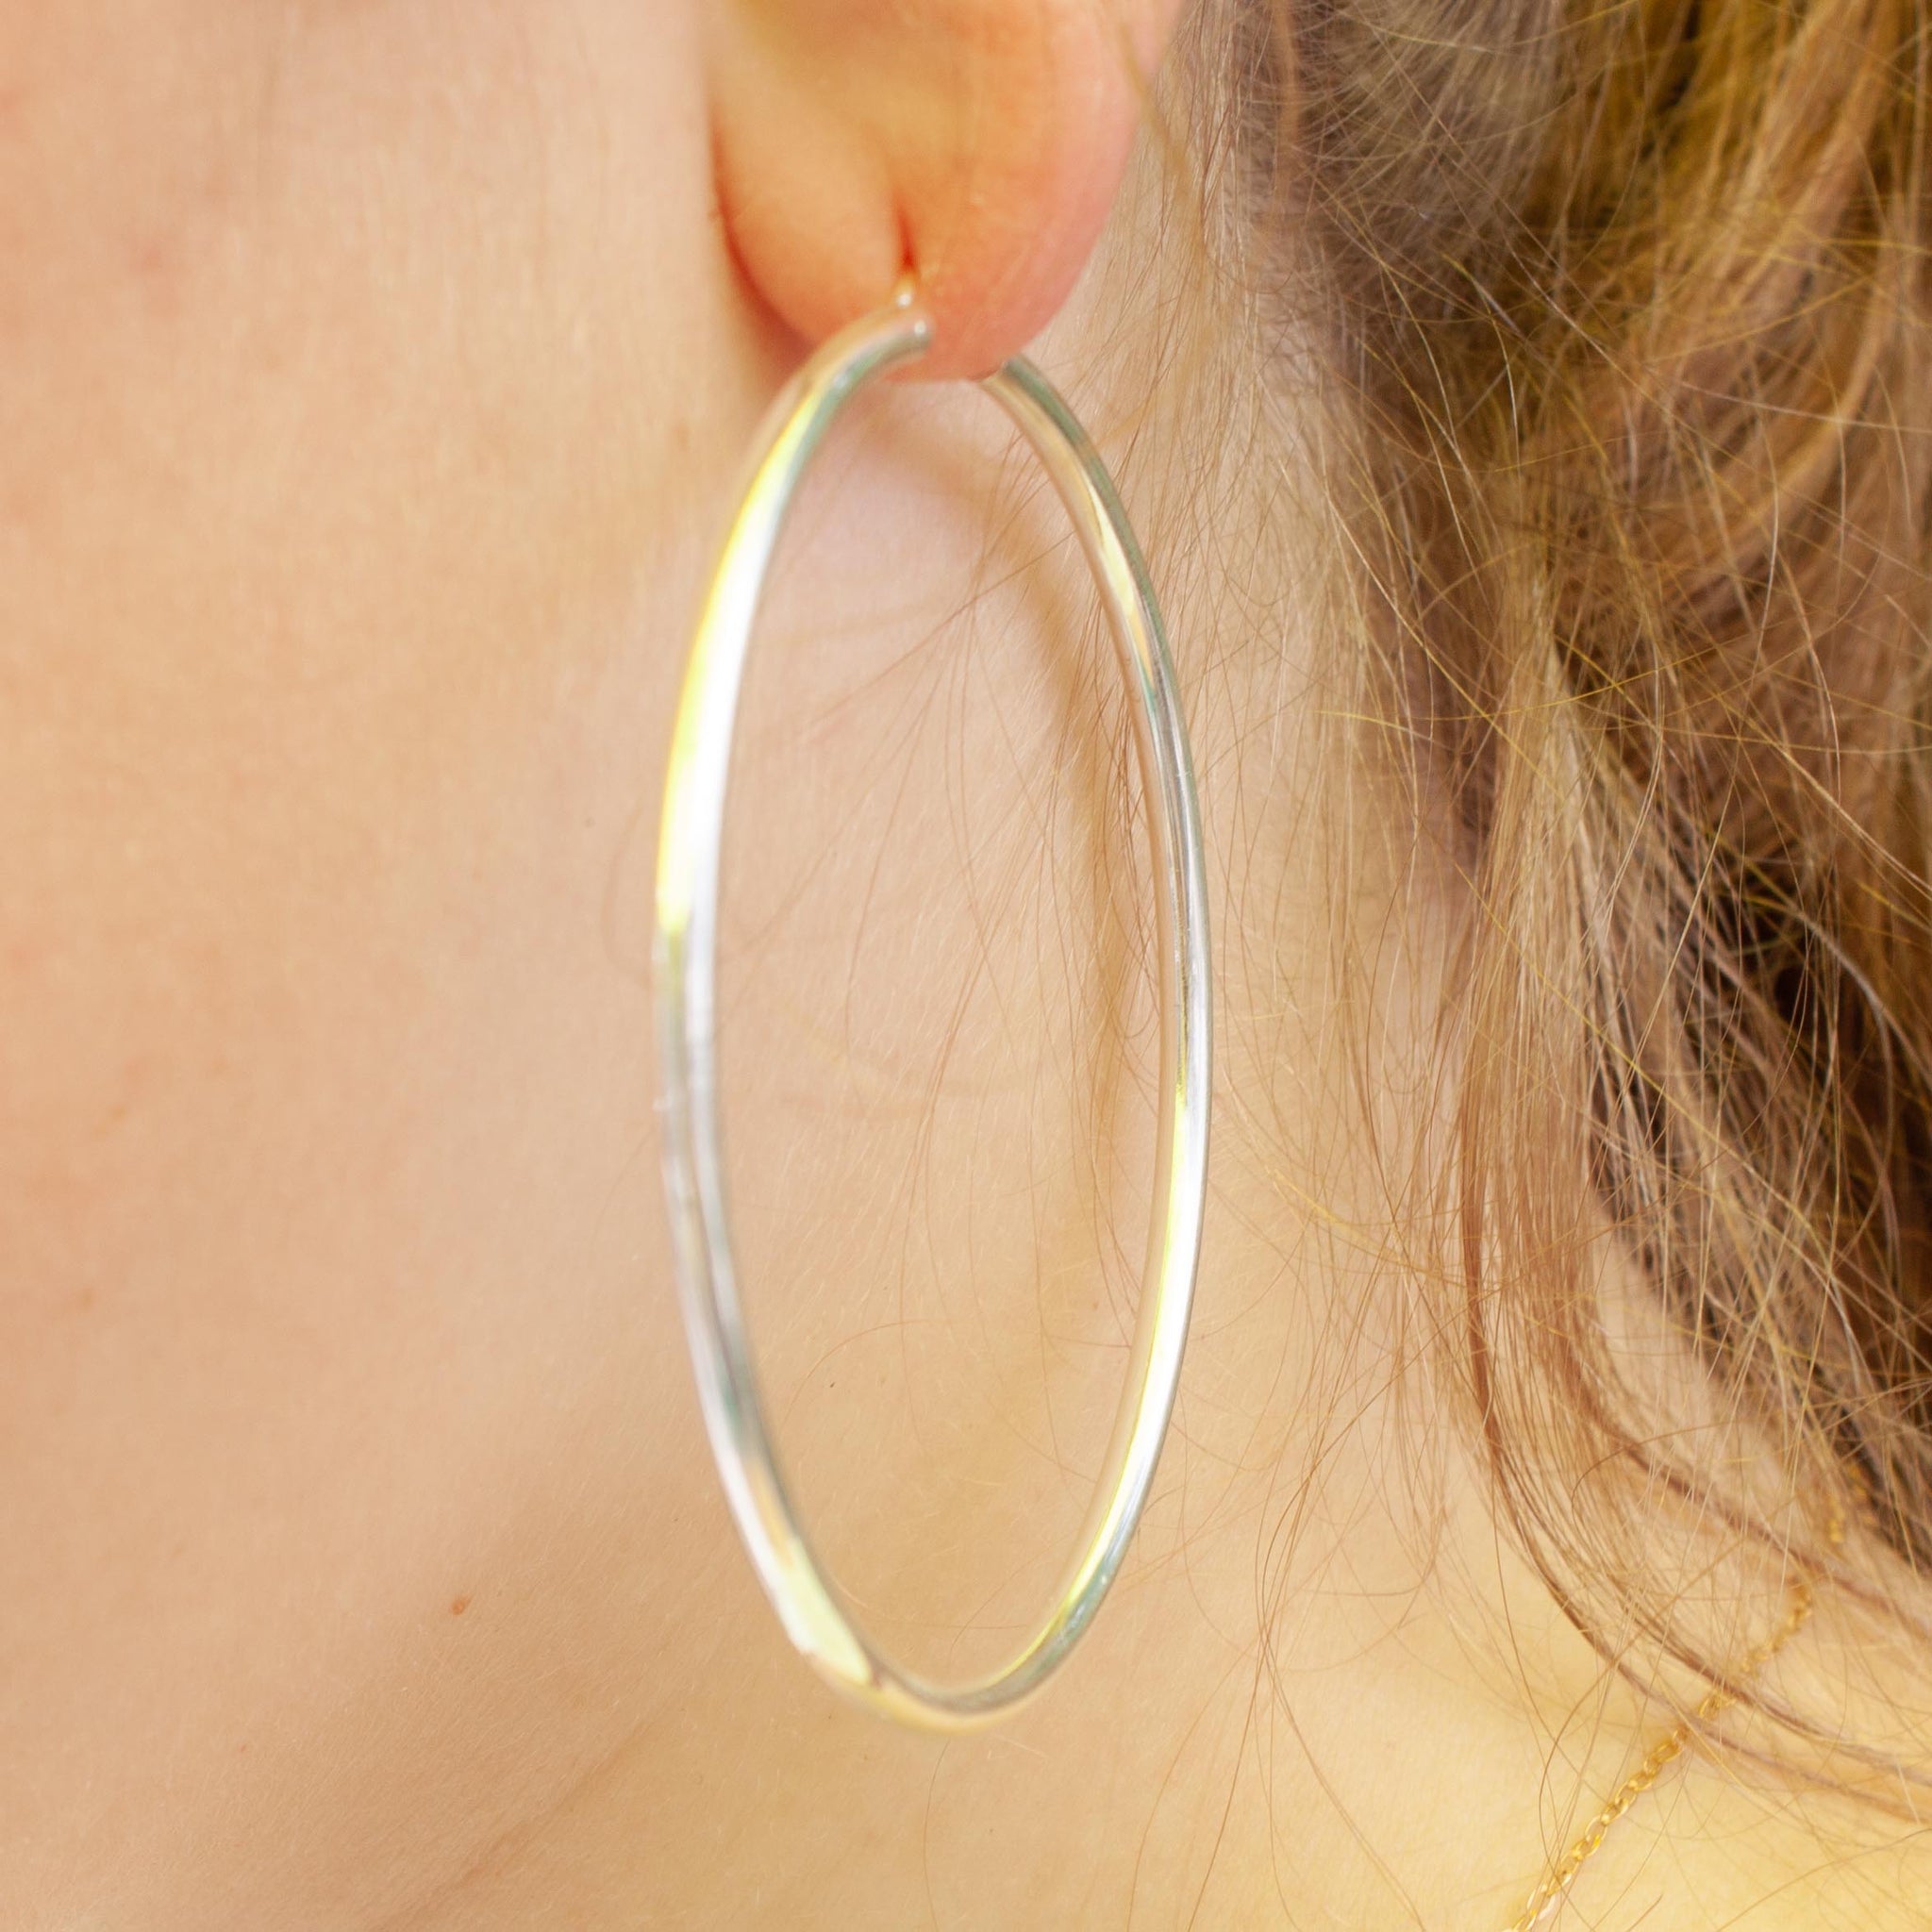 The biggest of the big! Make a statement with these substantial silver hoops.  sterling silver hoop earrings.  60mm diameter. kp jewelry co.